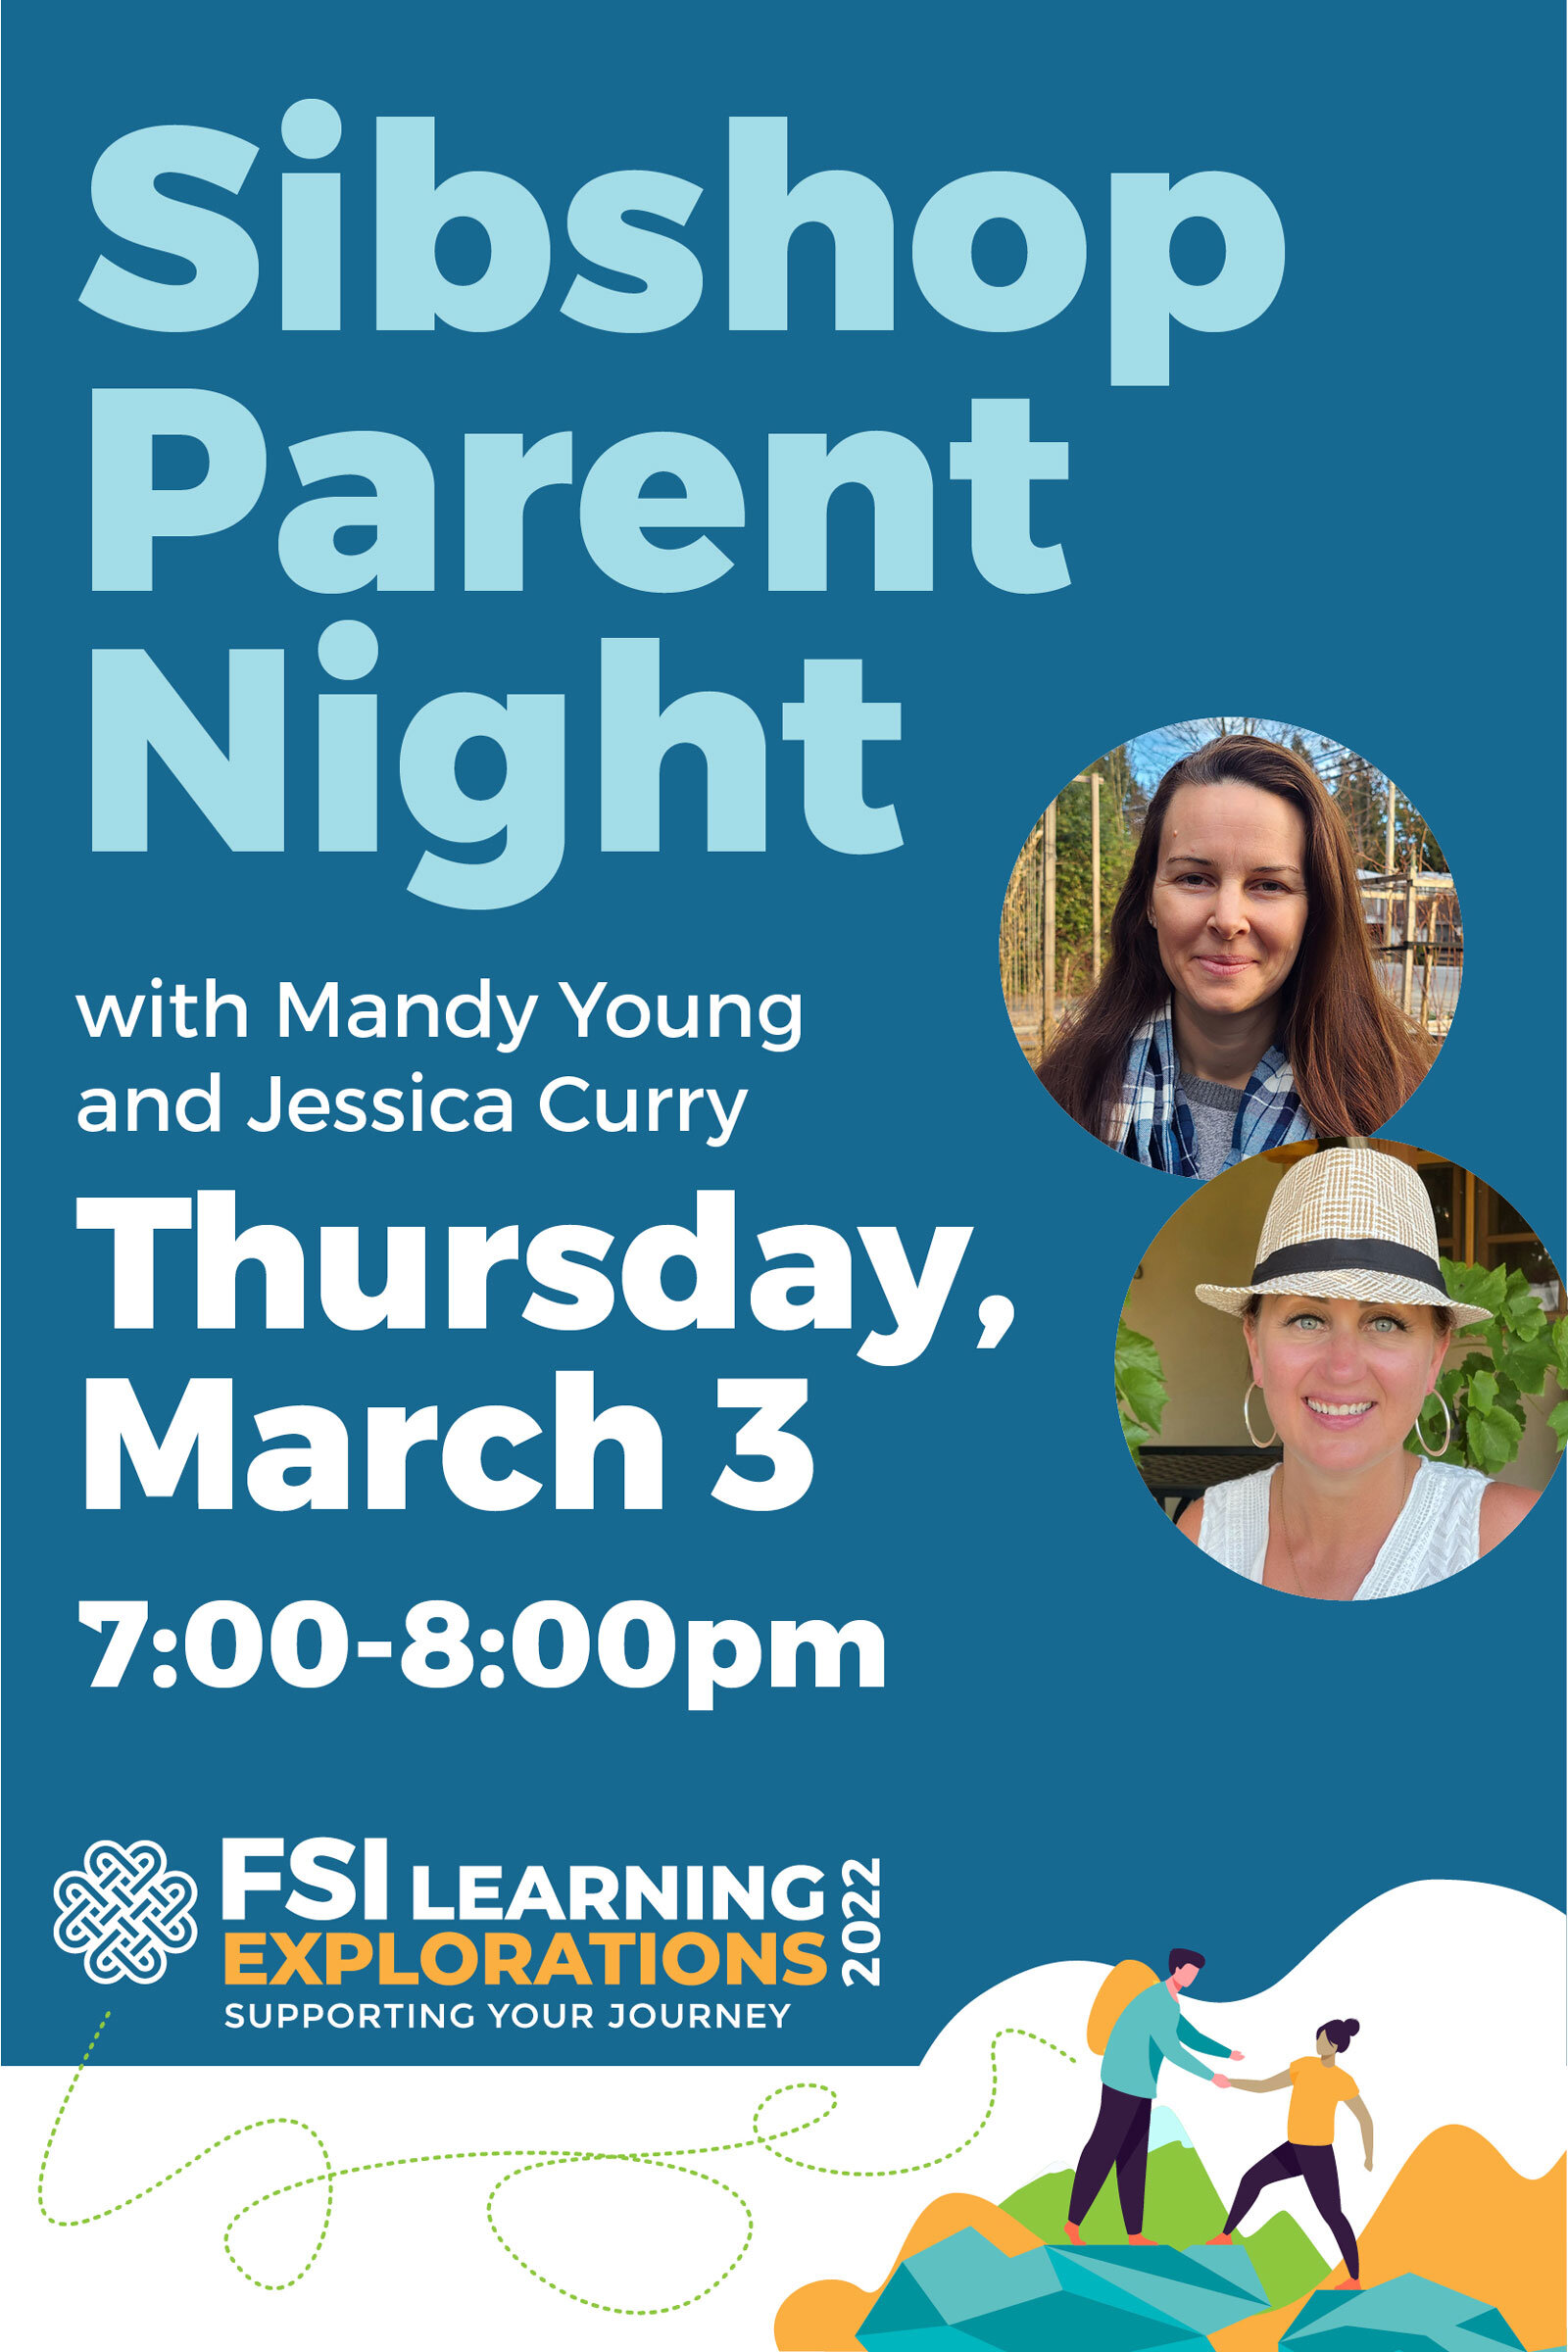 FSI Learning Explorations - Sibshop Parent Night